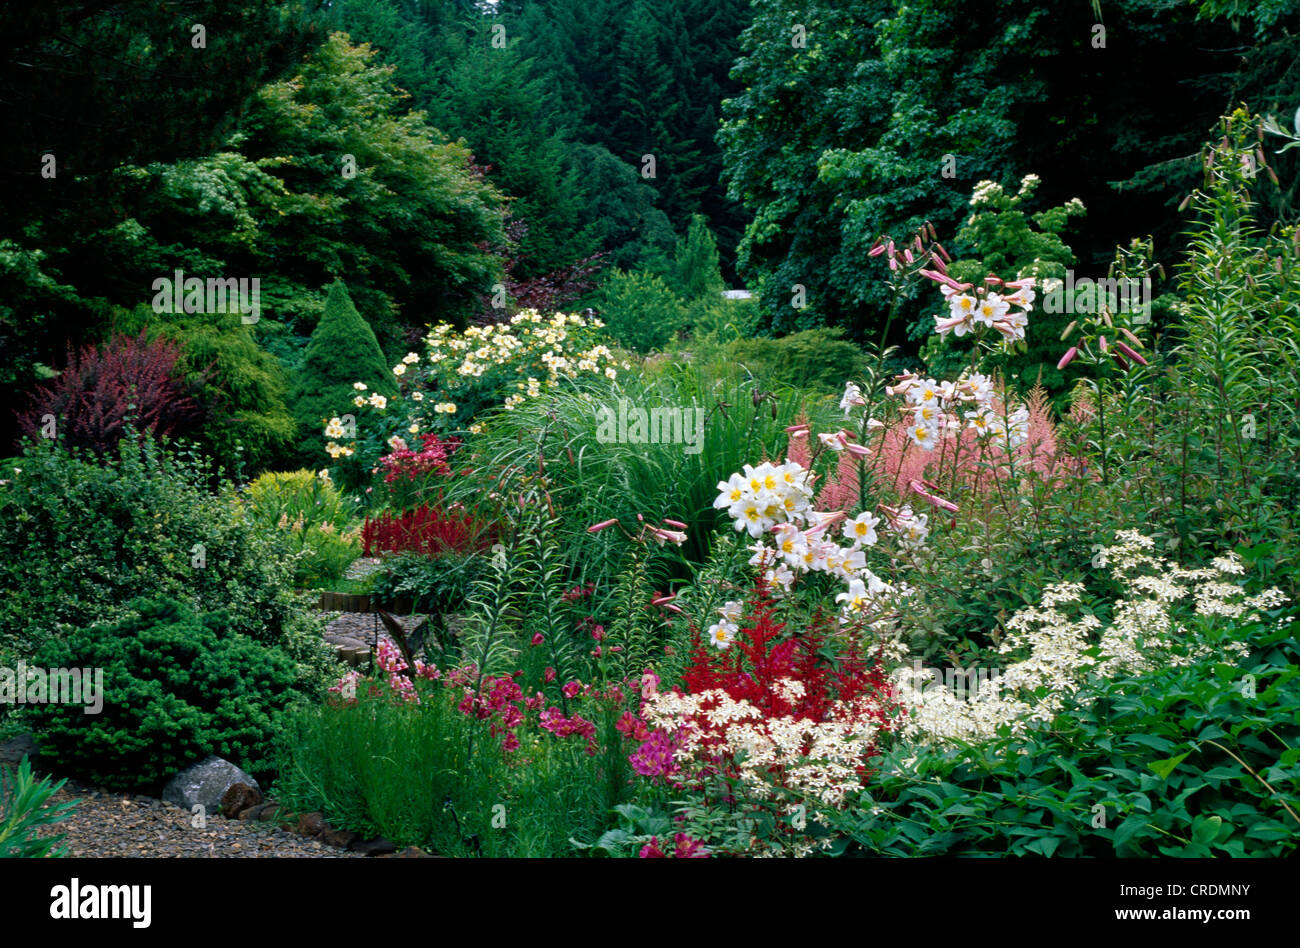 FLOWER GARDEN WITH ASTILBE 'SPINELL', REGAL LILIES, AND GROUND CLEMATIS. Stock Photo